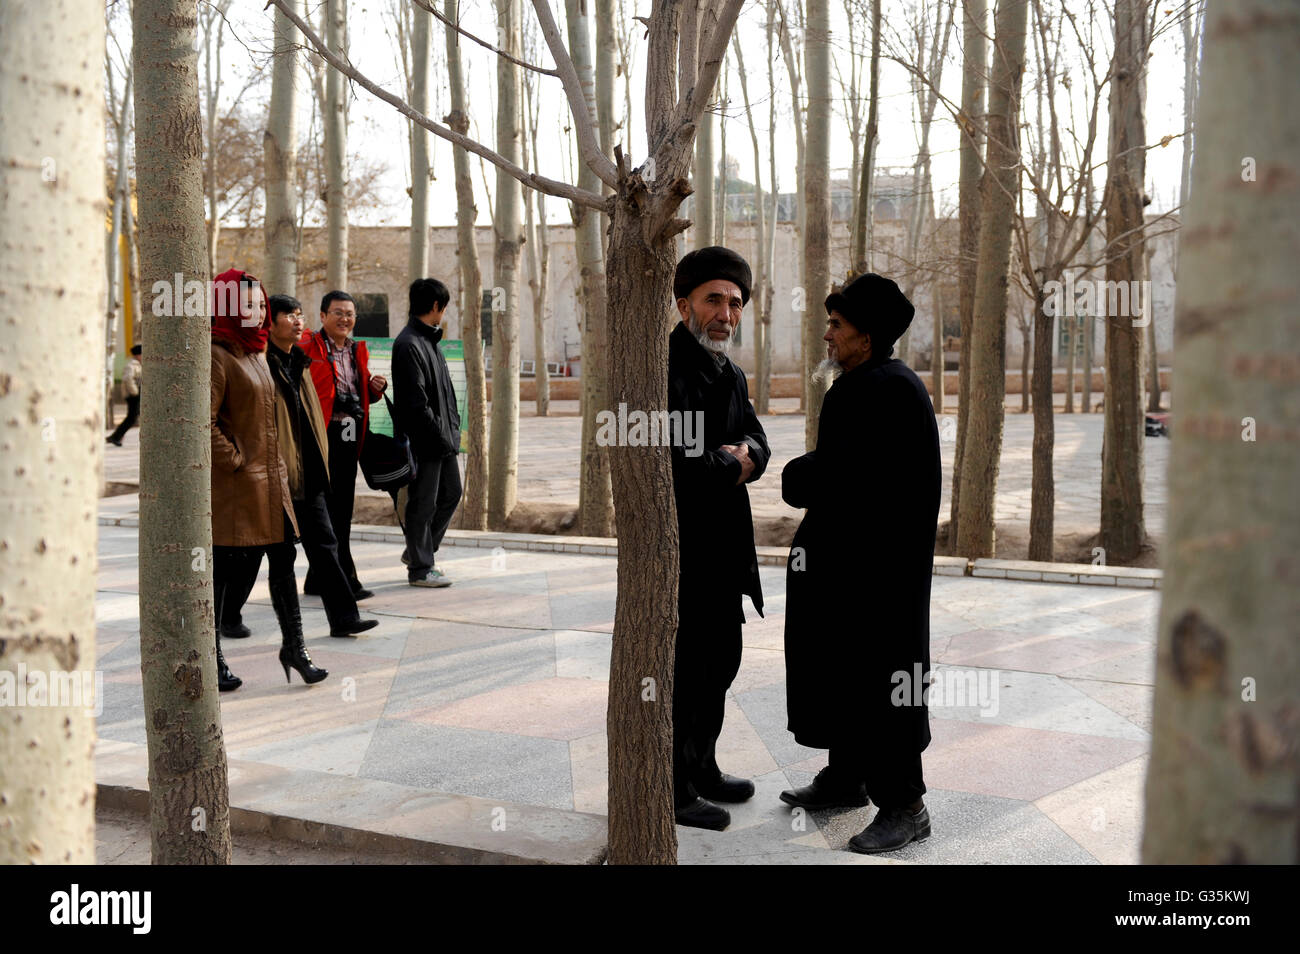 CHINA province Xinjiang, city Kashgar, where uyghur people are living , Heytgar or Idkah mosque, two uighur men wearing a fur hat and Han-chinese tourists, Id Kah mosque is the largest mosque in China and may accommodate up to 20,000 worshipper Stock Photo